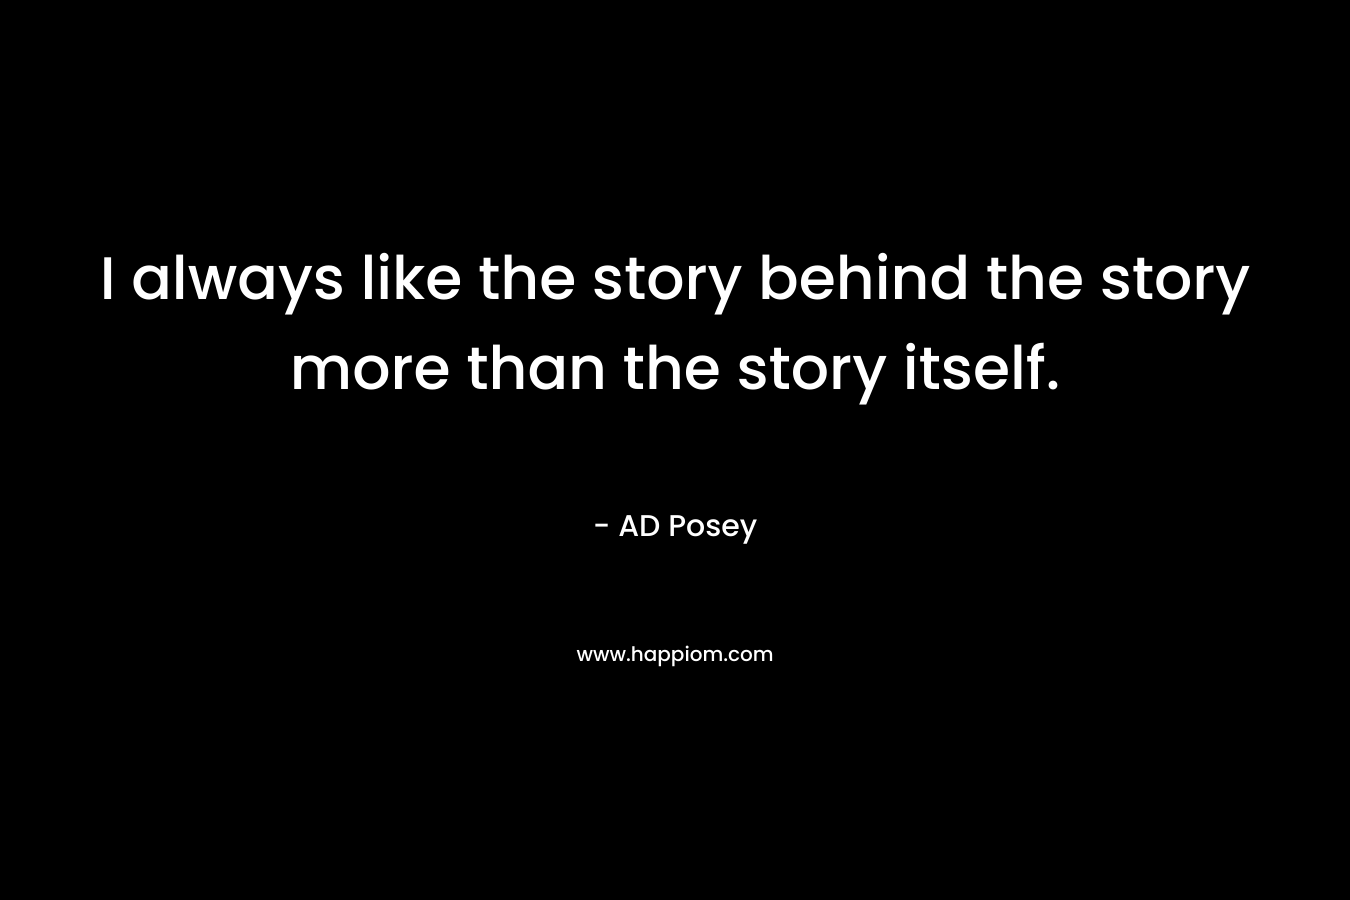 I always like the story behind the story more than the story itself.